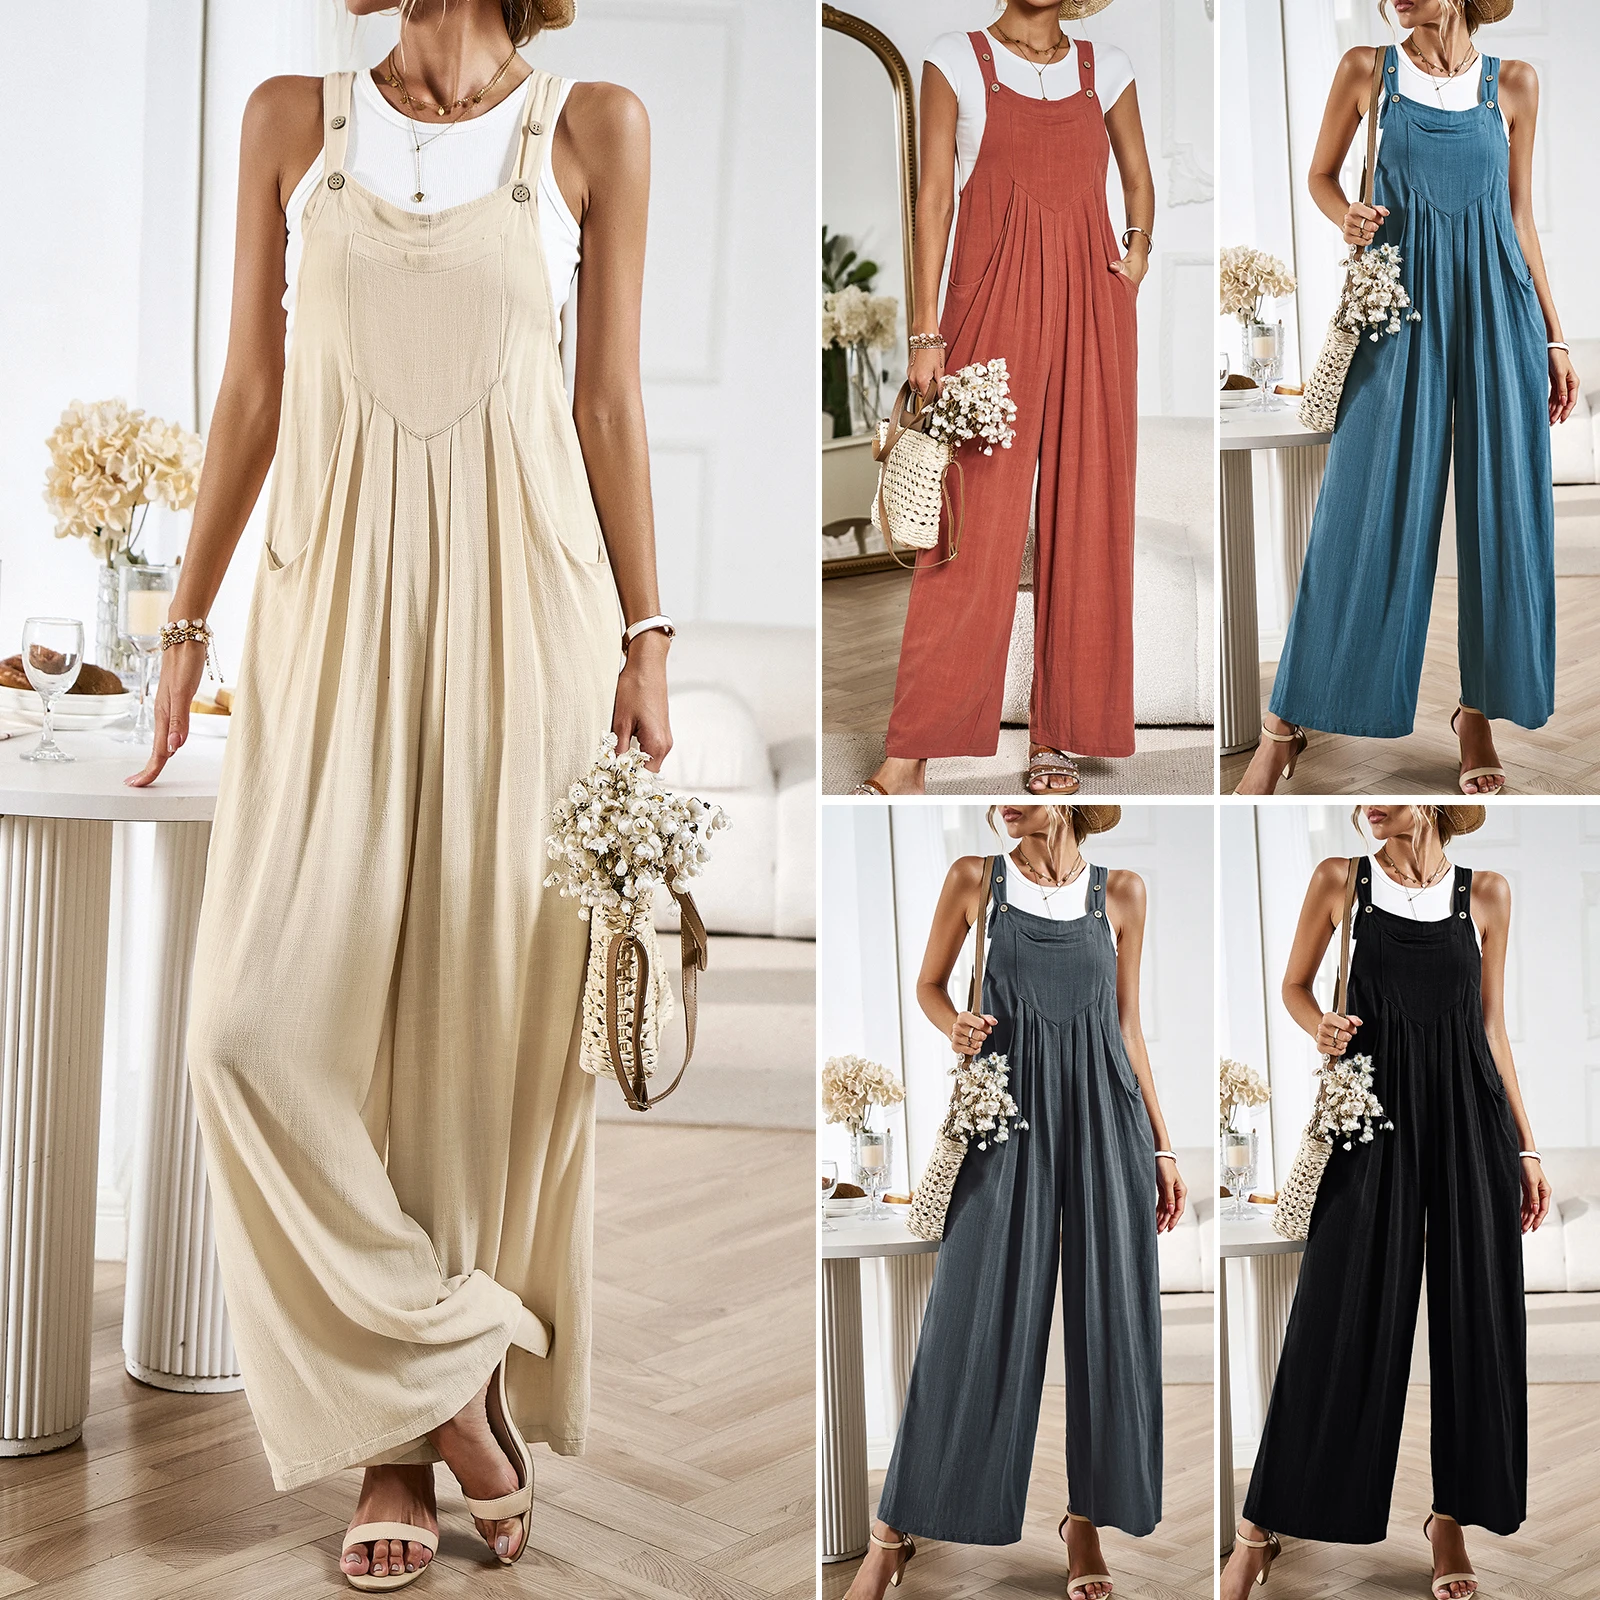 Adjustable Straps Loose Overalls Fashion Casual Button Wide Leg Straight Jumpsuit Summer Sleeveless Trousers with Pockets Romper v neck jumpsuit stylish women s denim bib overalls with adjustable straps pockets relaxed fit casual jumpsuit for streetwear